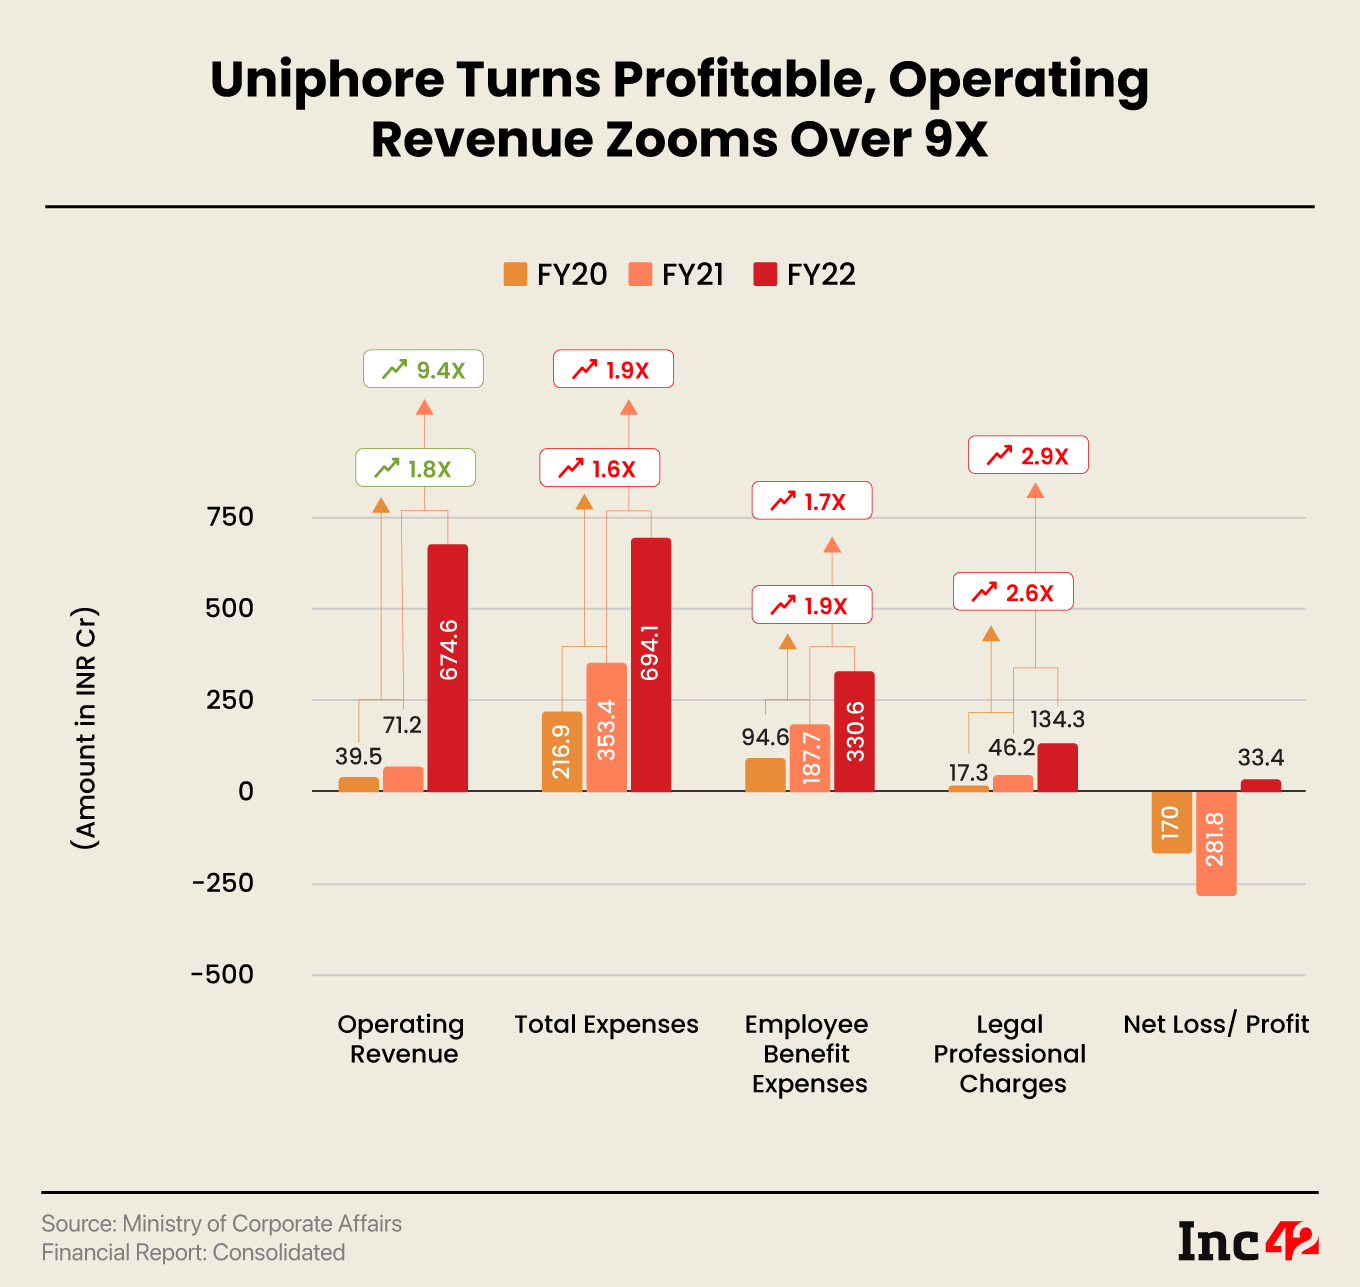 SaaS Unicorn Uniphore Turns Profitable In FY22, Operating Revenue Zooms Over 9X